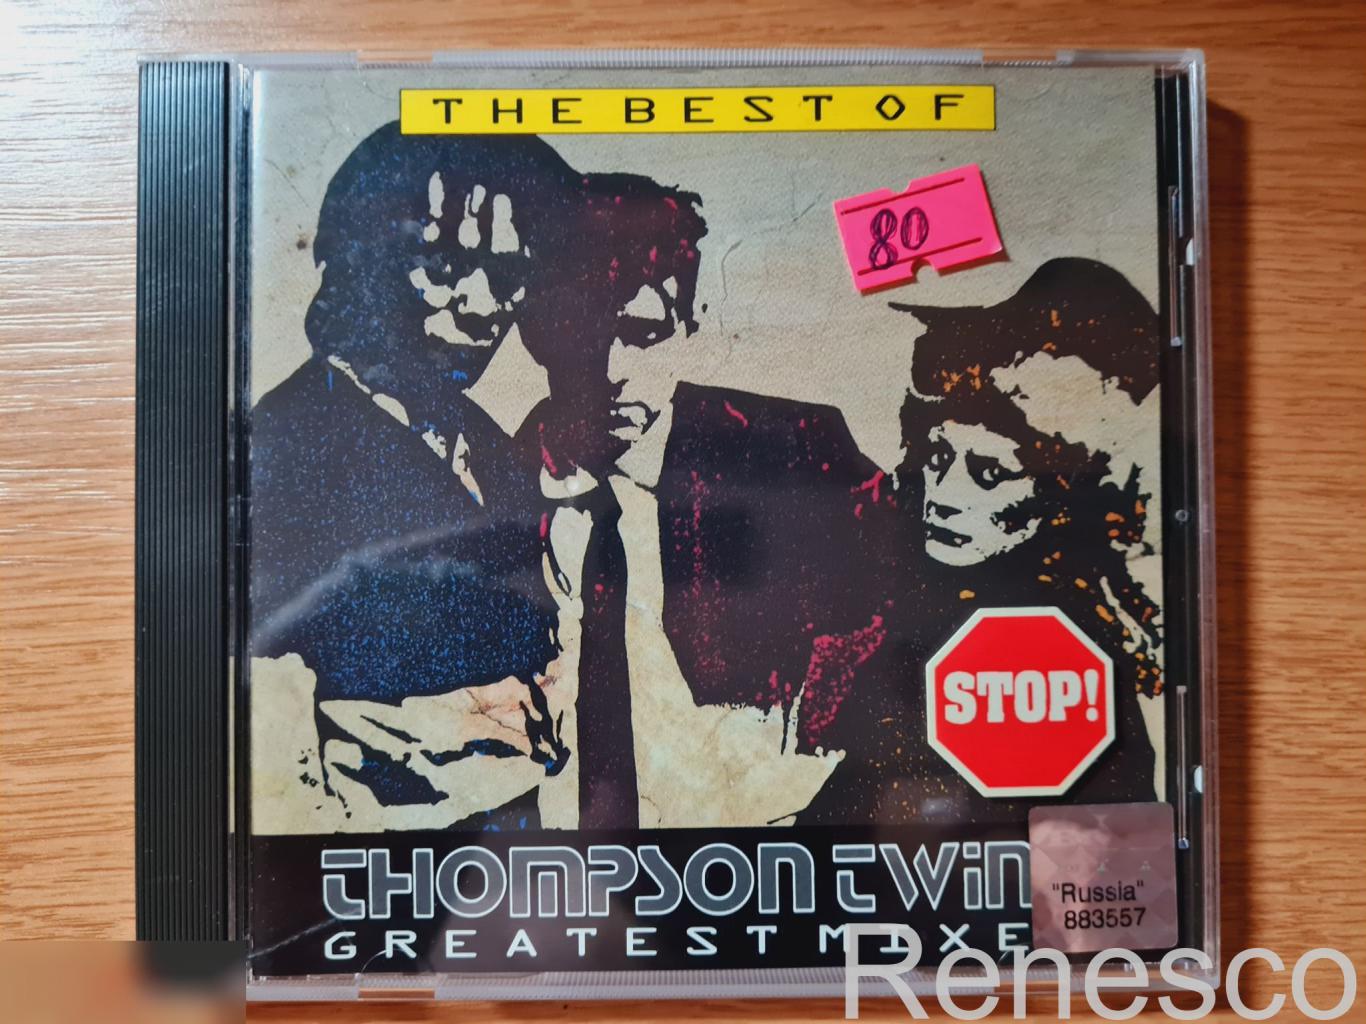 Thompson Twins ?– The Best Of Thompson Twins, Greatest Mixes (Germany) (1994)